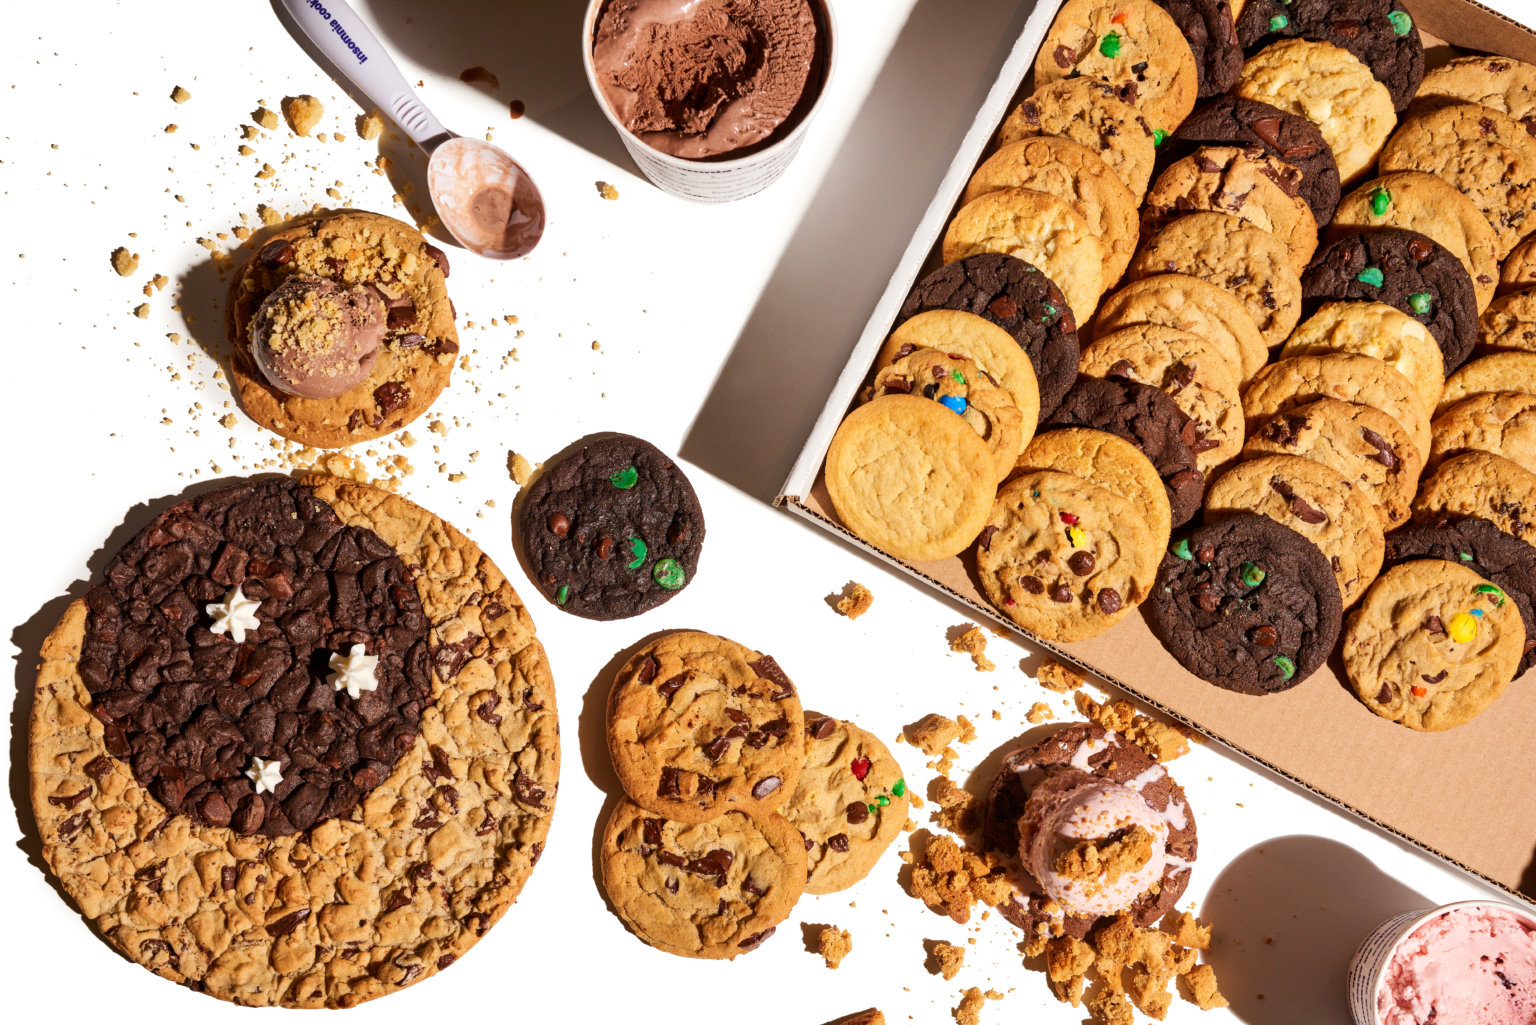 insomnia cookies delivery base pay